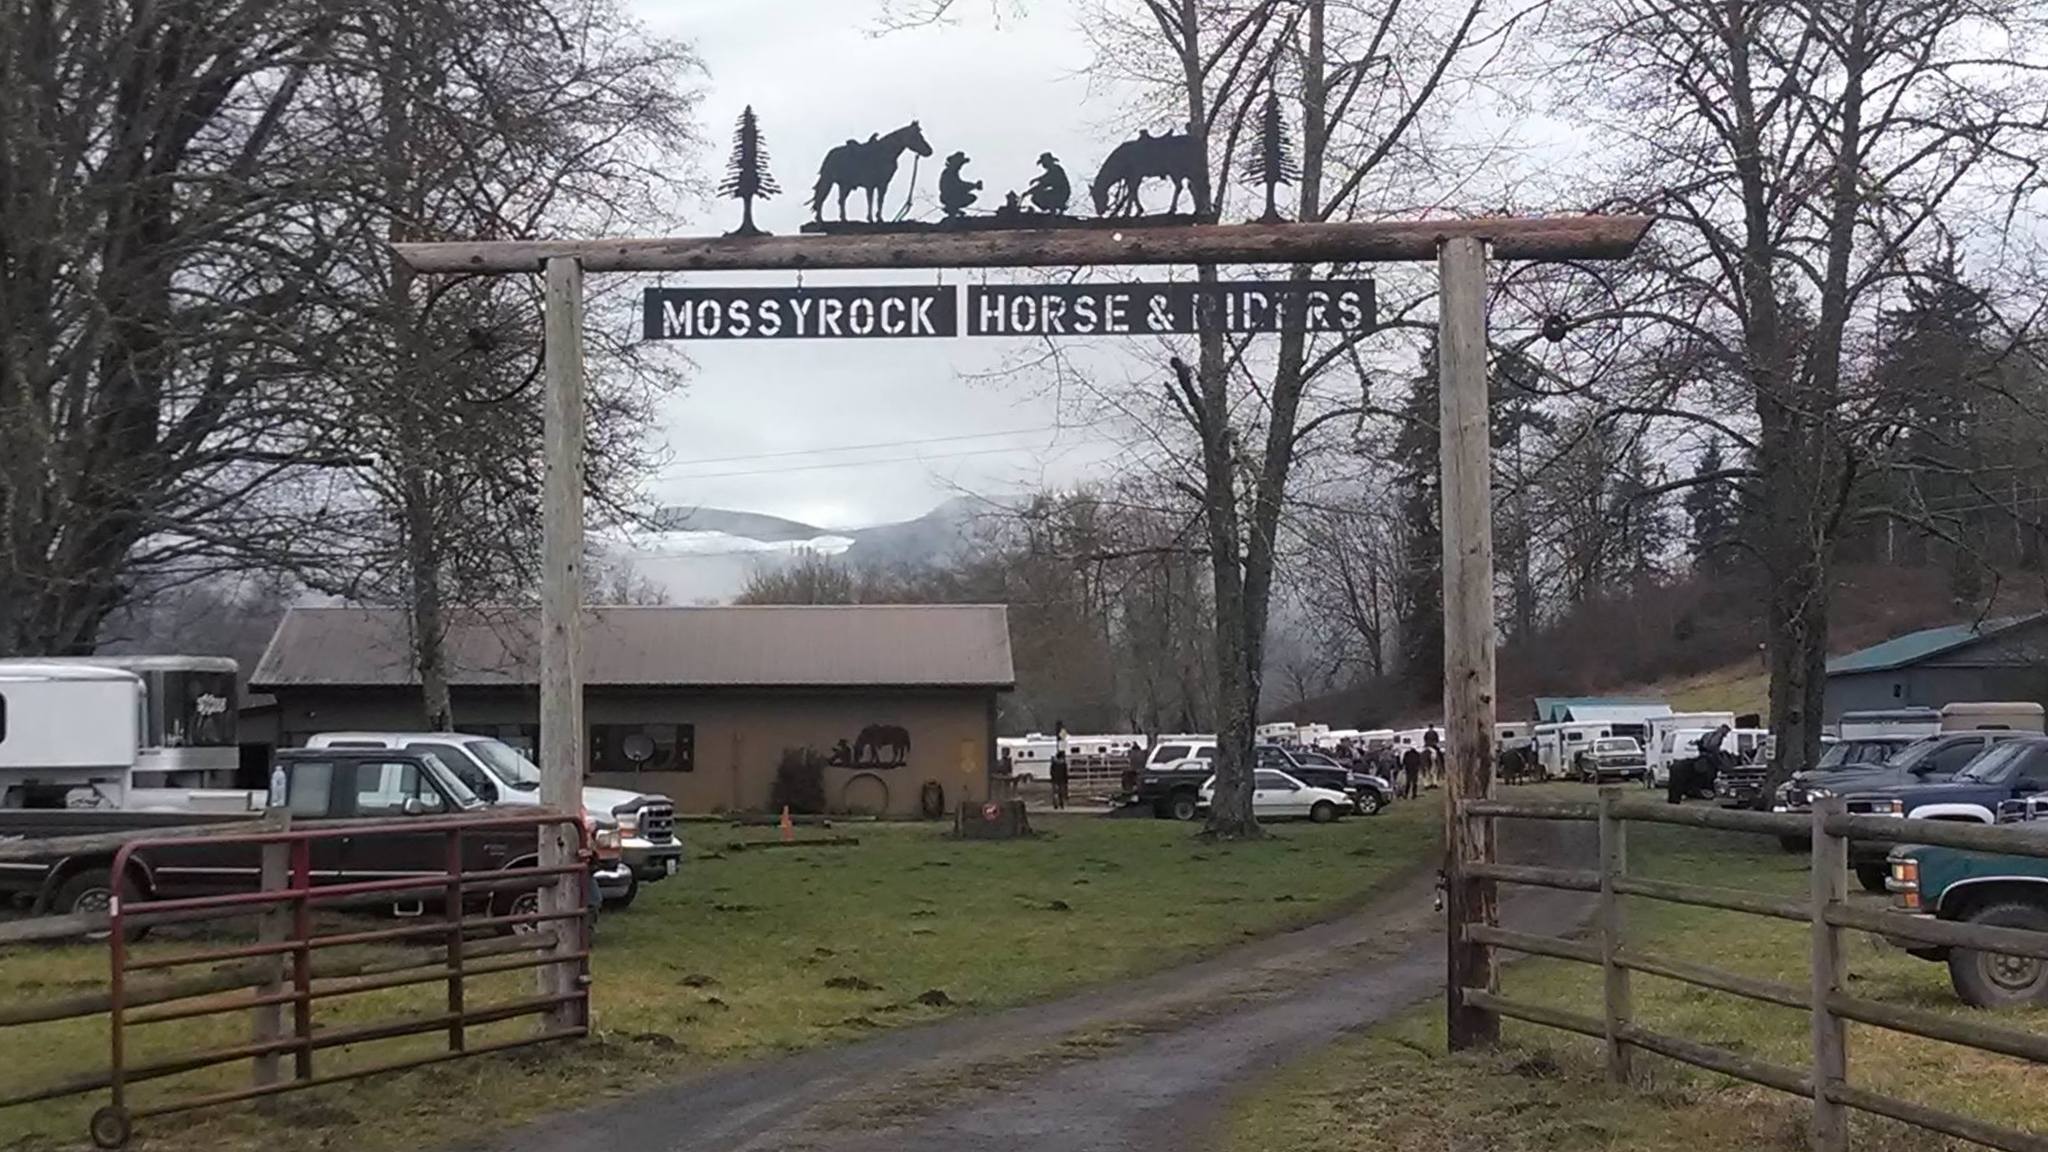 There are good times to be had at Mossyrock Horse and Riders Club.  We offer a variety of events, good people, and good food.  Join us for trail rides, clinics, and member camping.